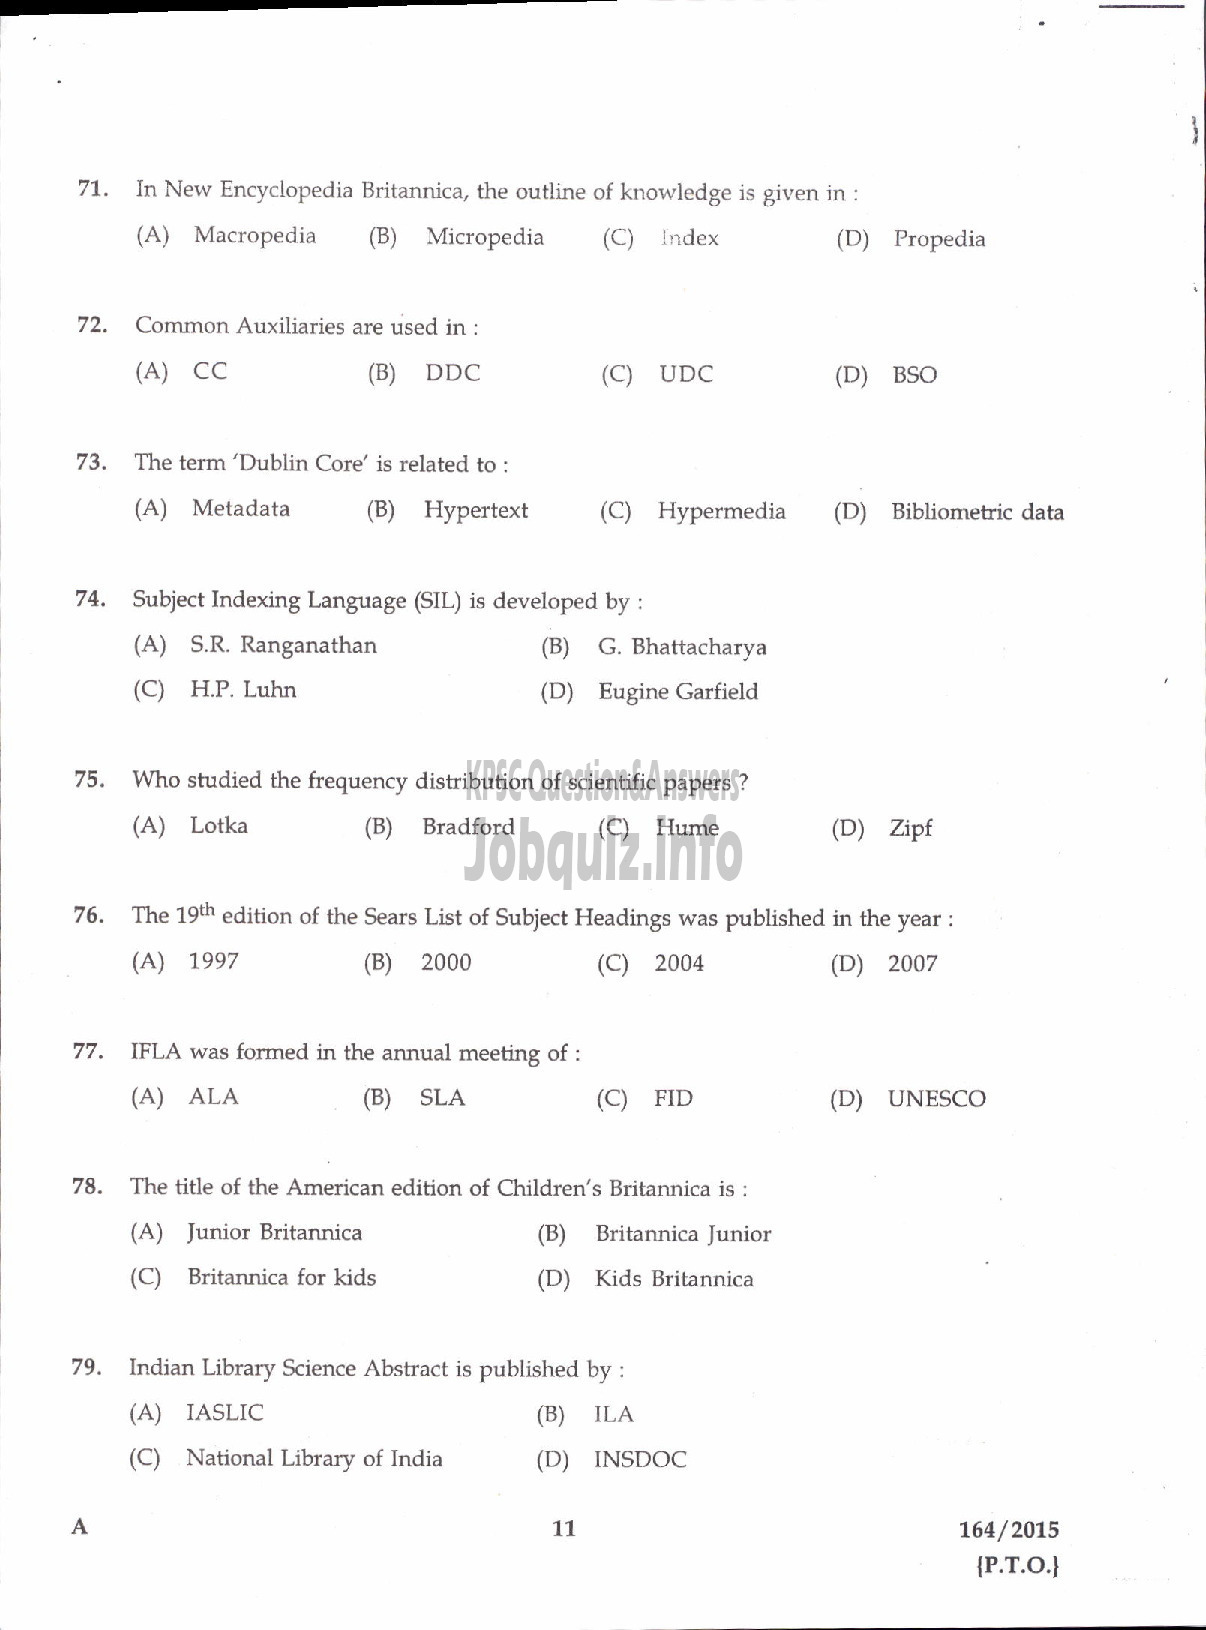 Kerala PSC Question Paper - LIBRARIAN GR III STATE CENTRAL LIBRARY-9